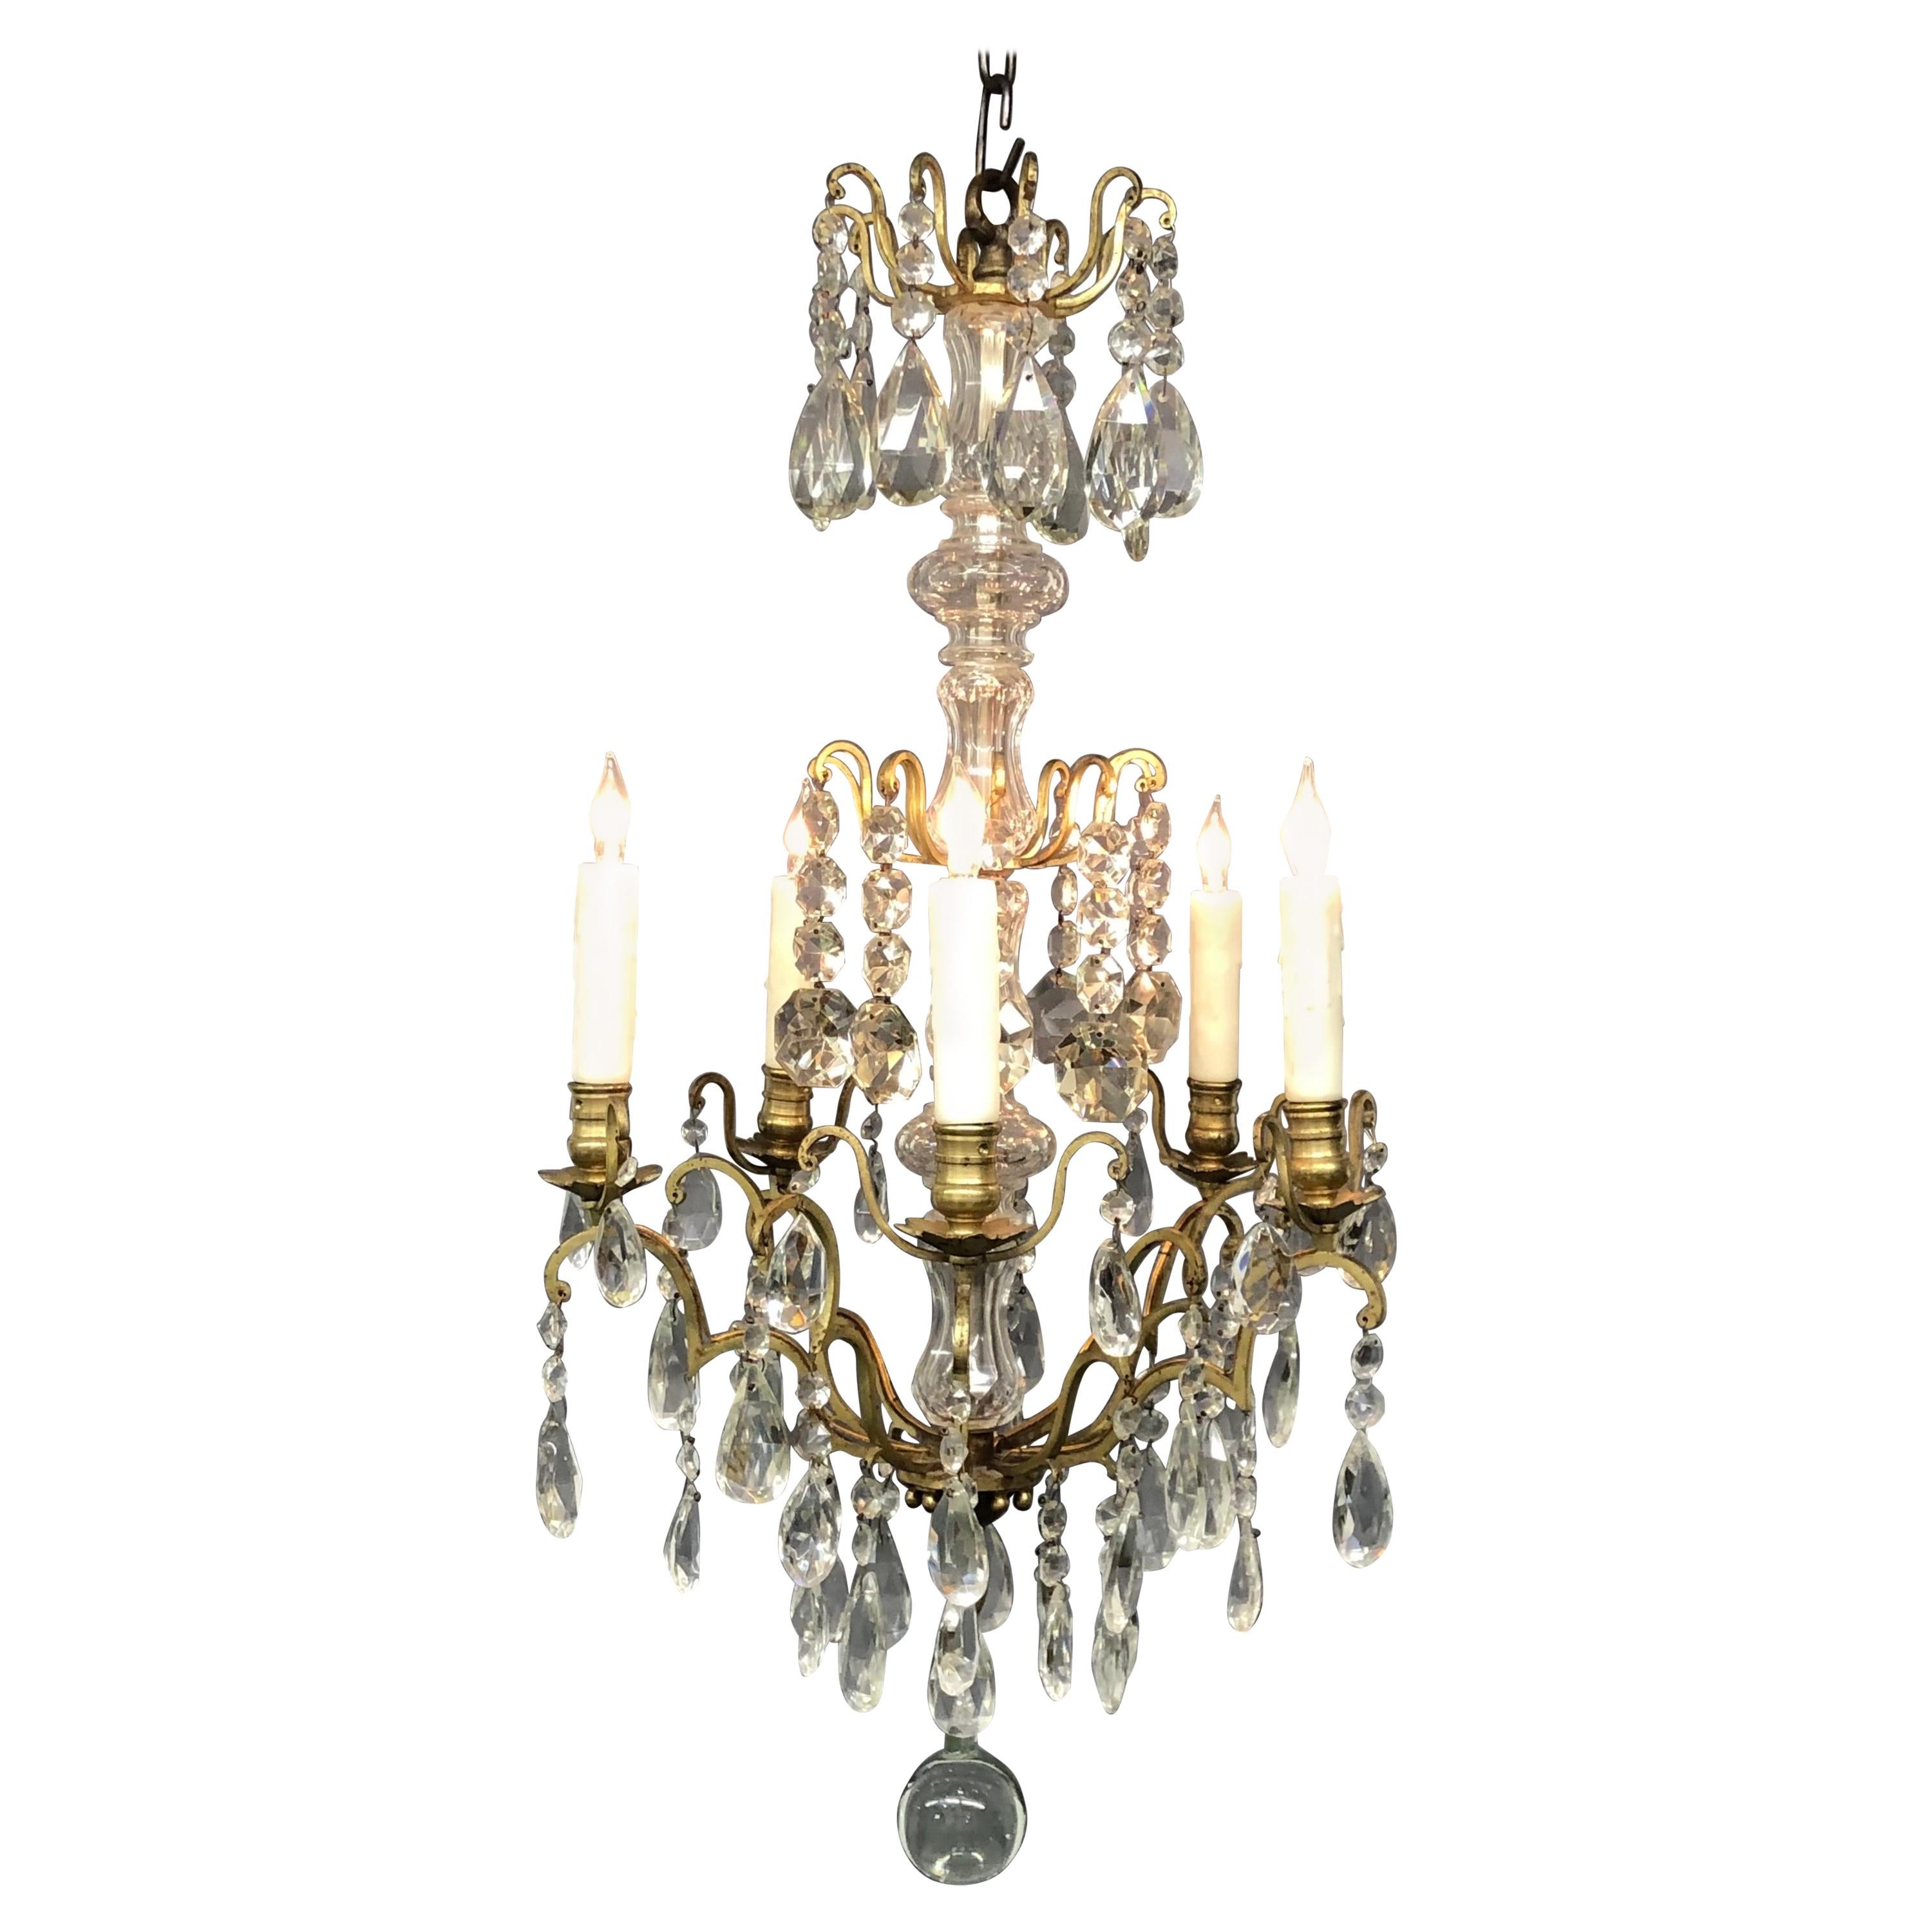 Antique French Louis XVI Style Gilt Bronze and Crystal 5-Arm Chandelier